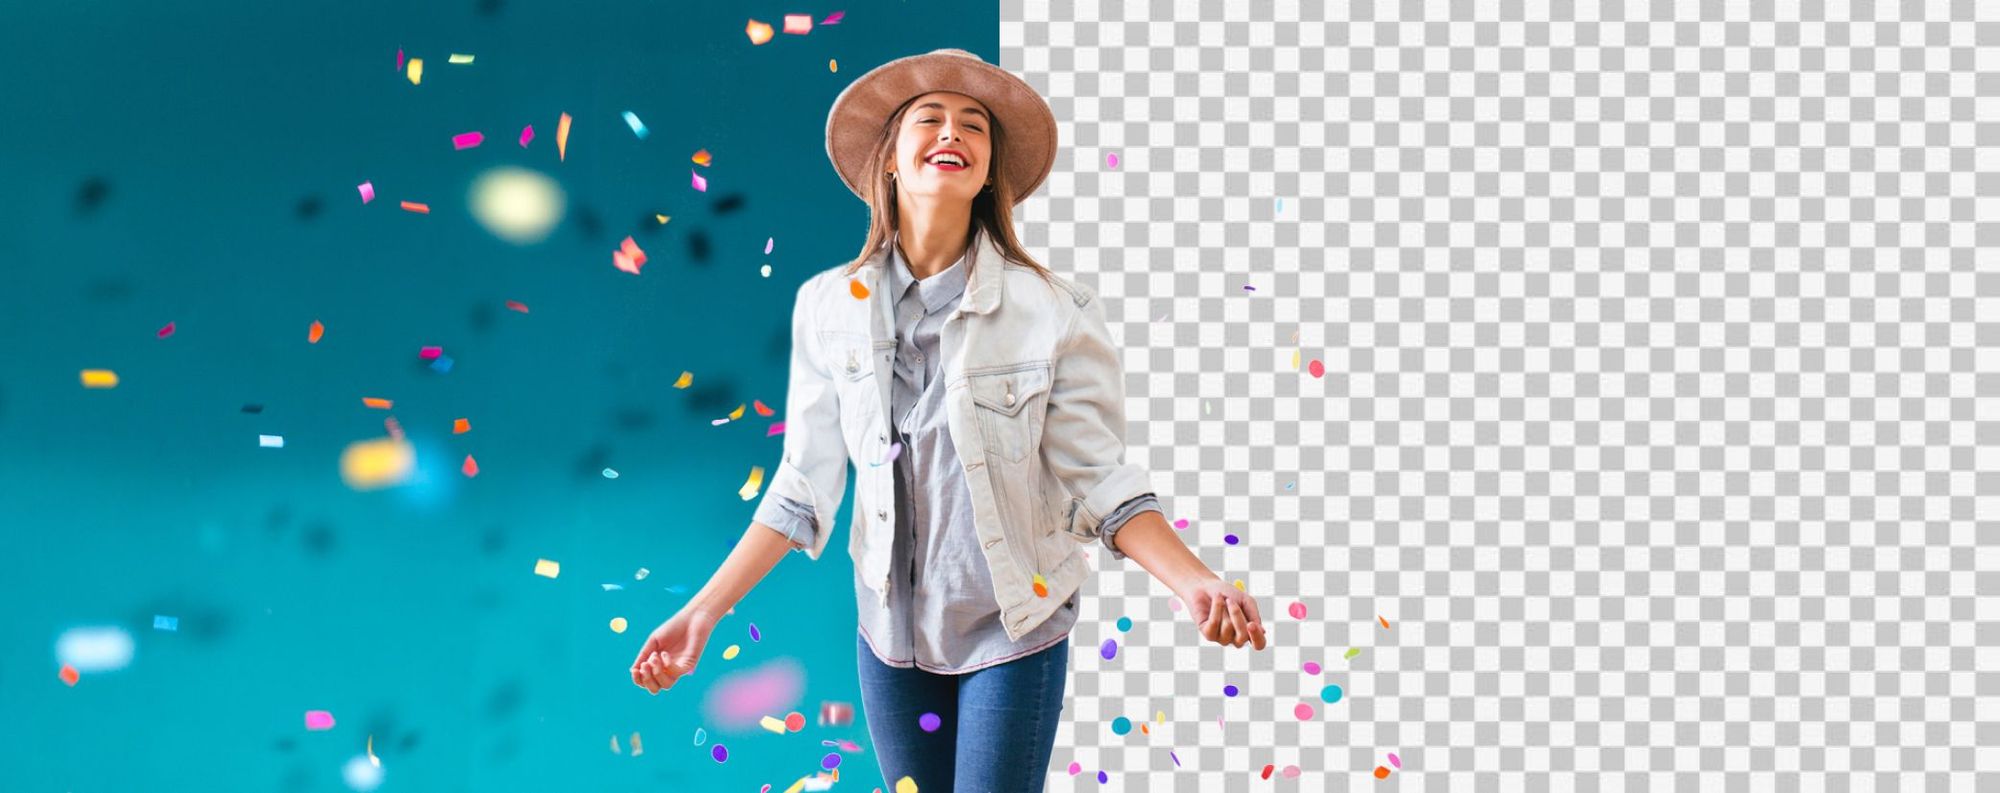 5 Ways to Remove Background of an Image in Photoshop